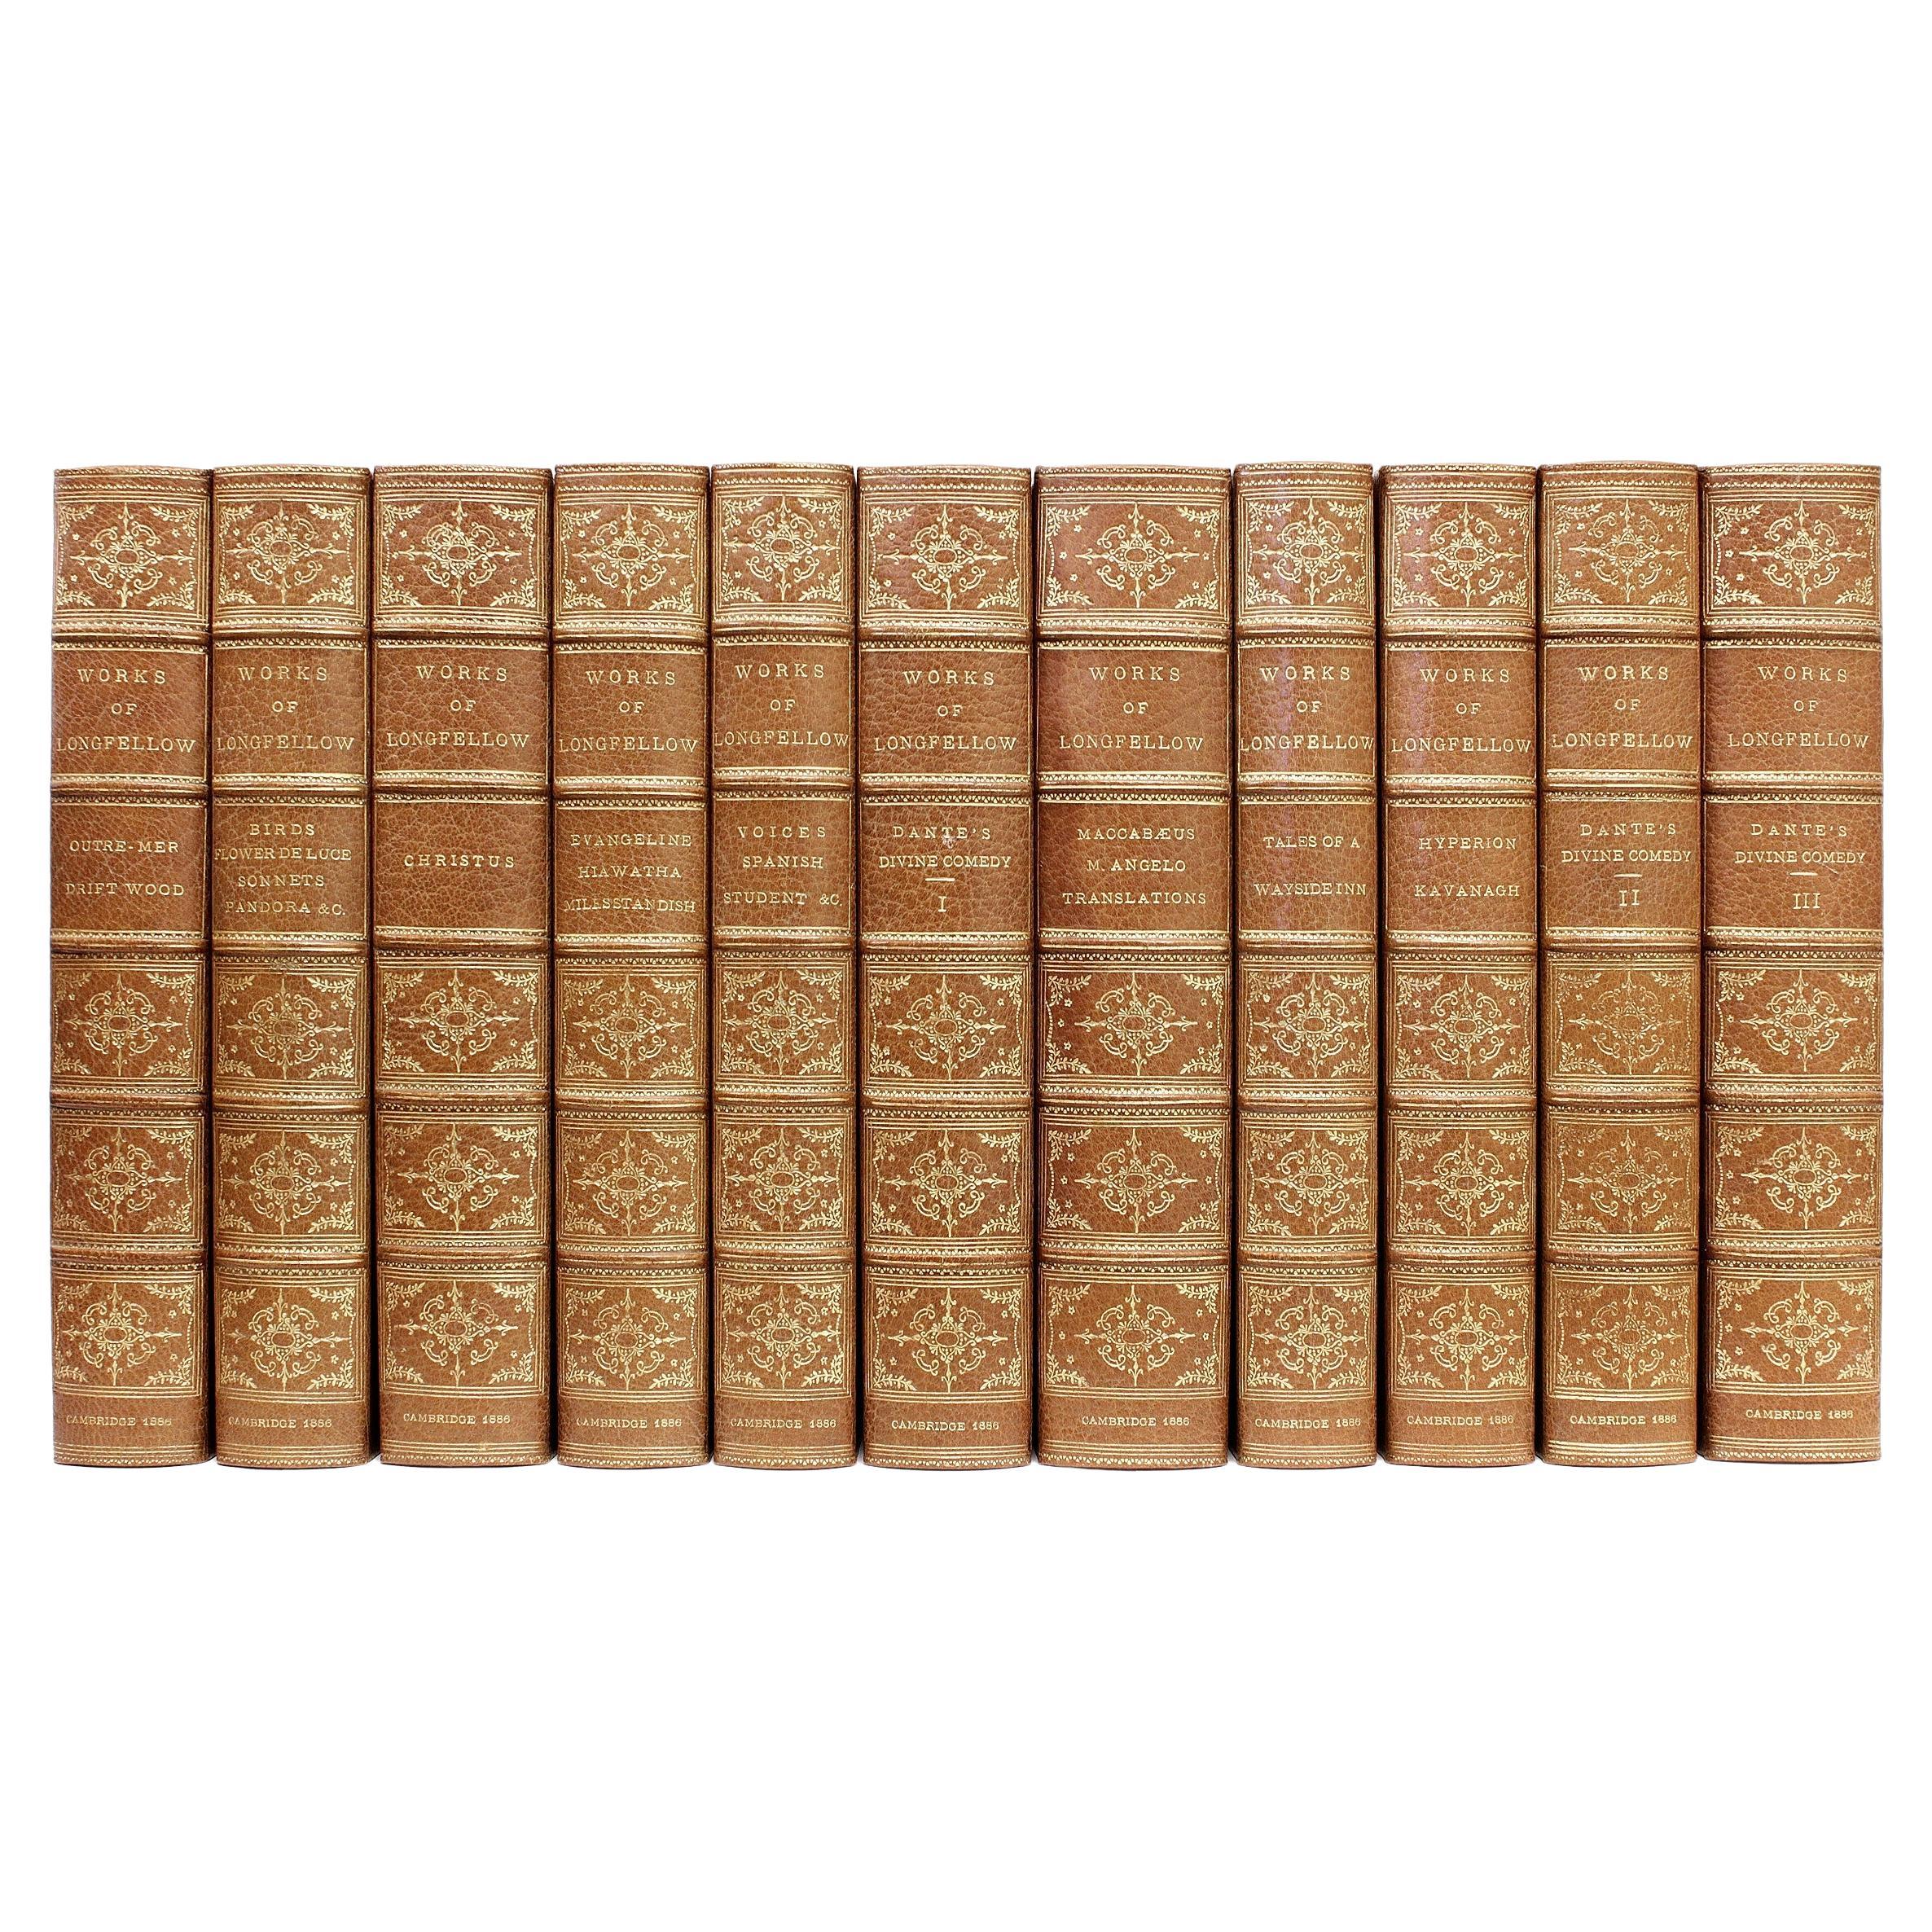 Complete Works Of Henry Wadsworth Longfellow. 11 vols. LARGE PAPER EDITION 1886 For Sale